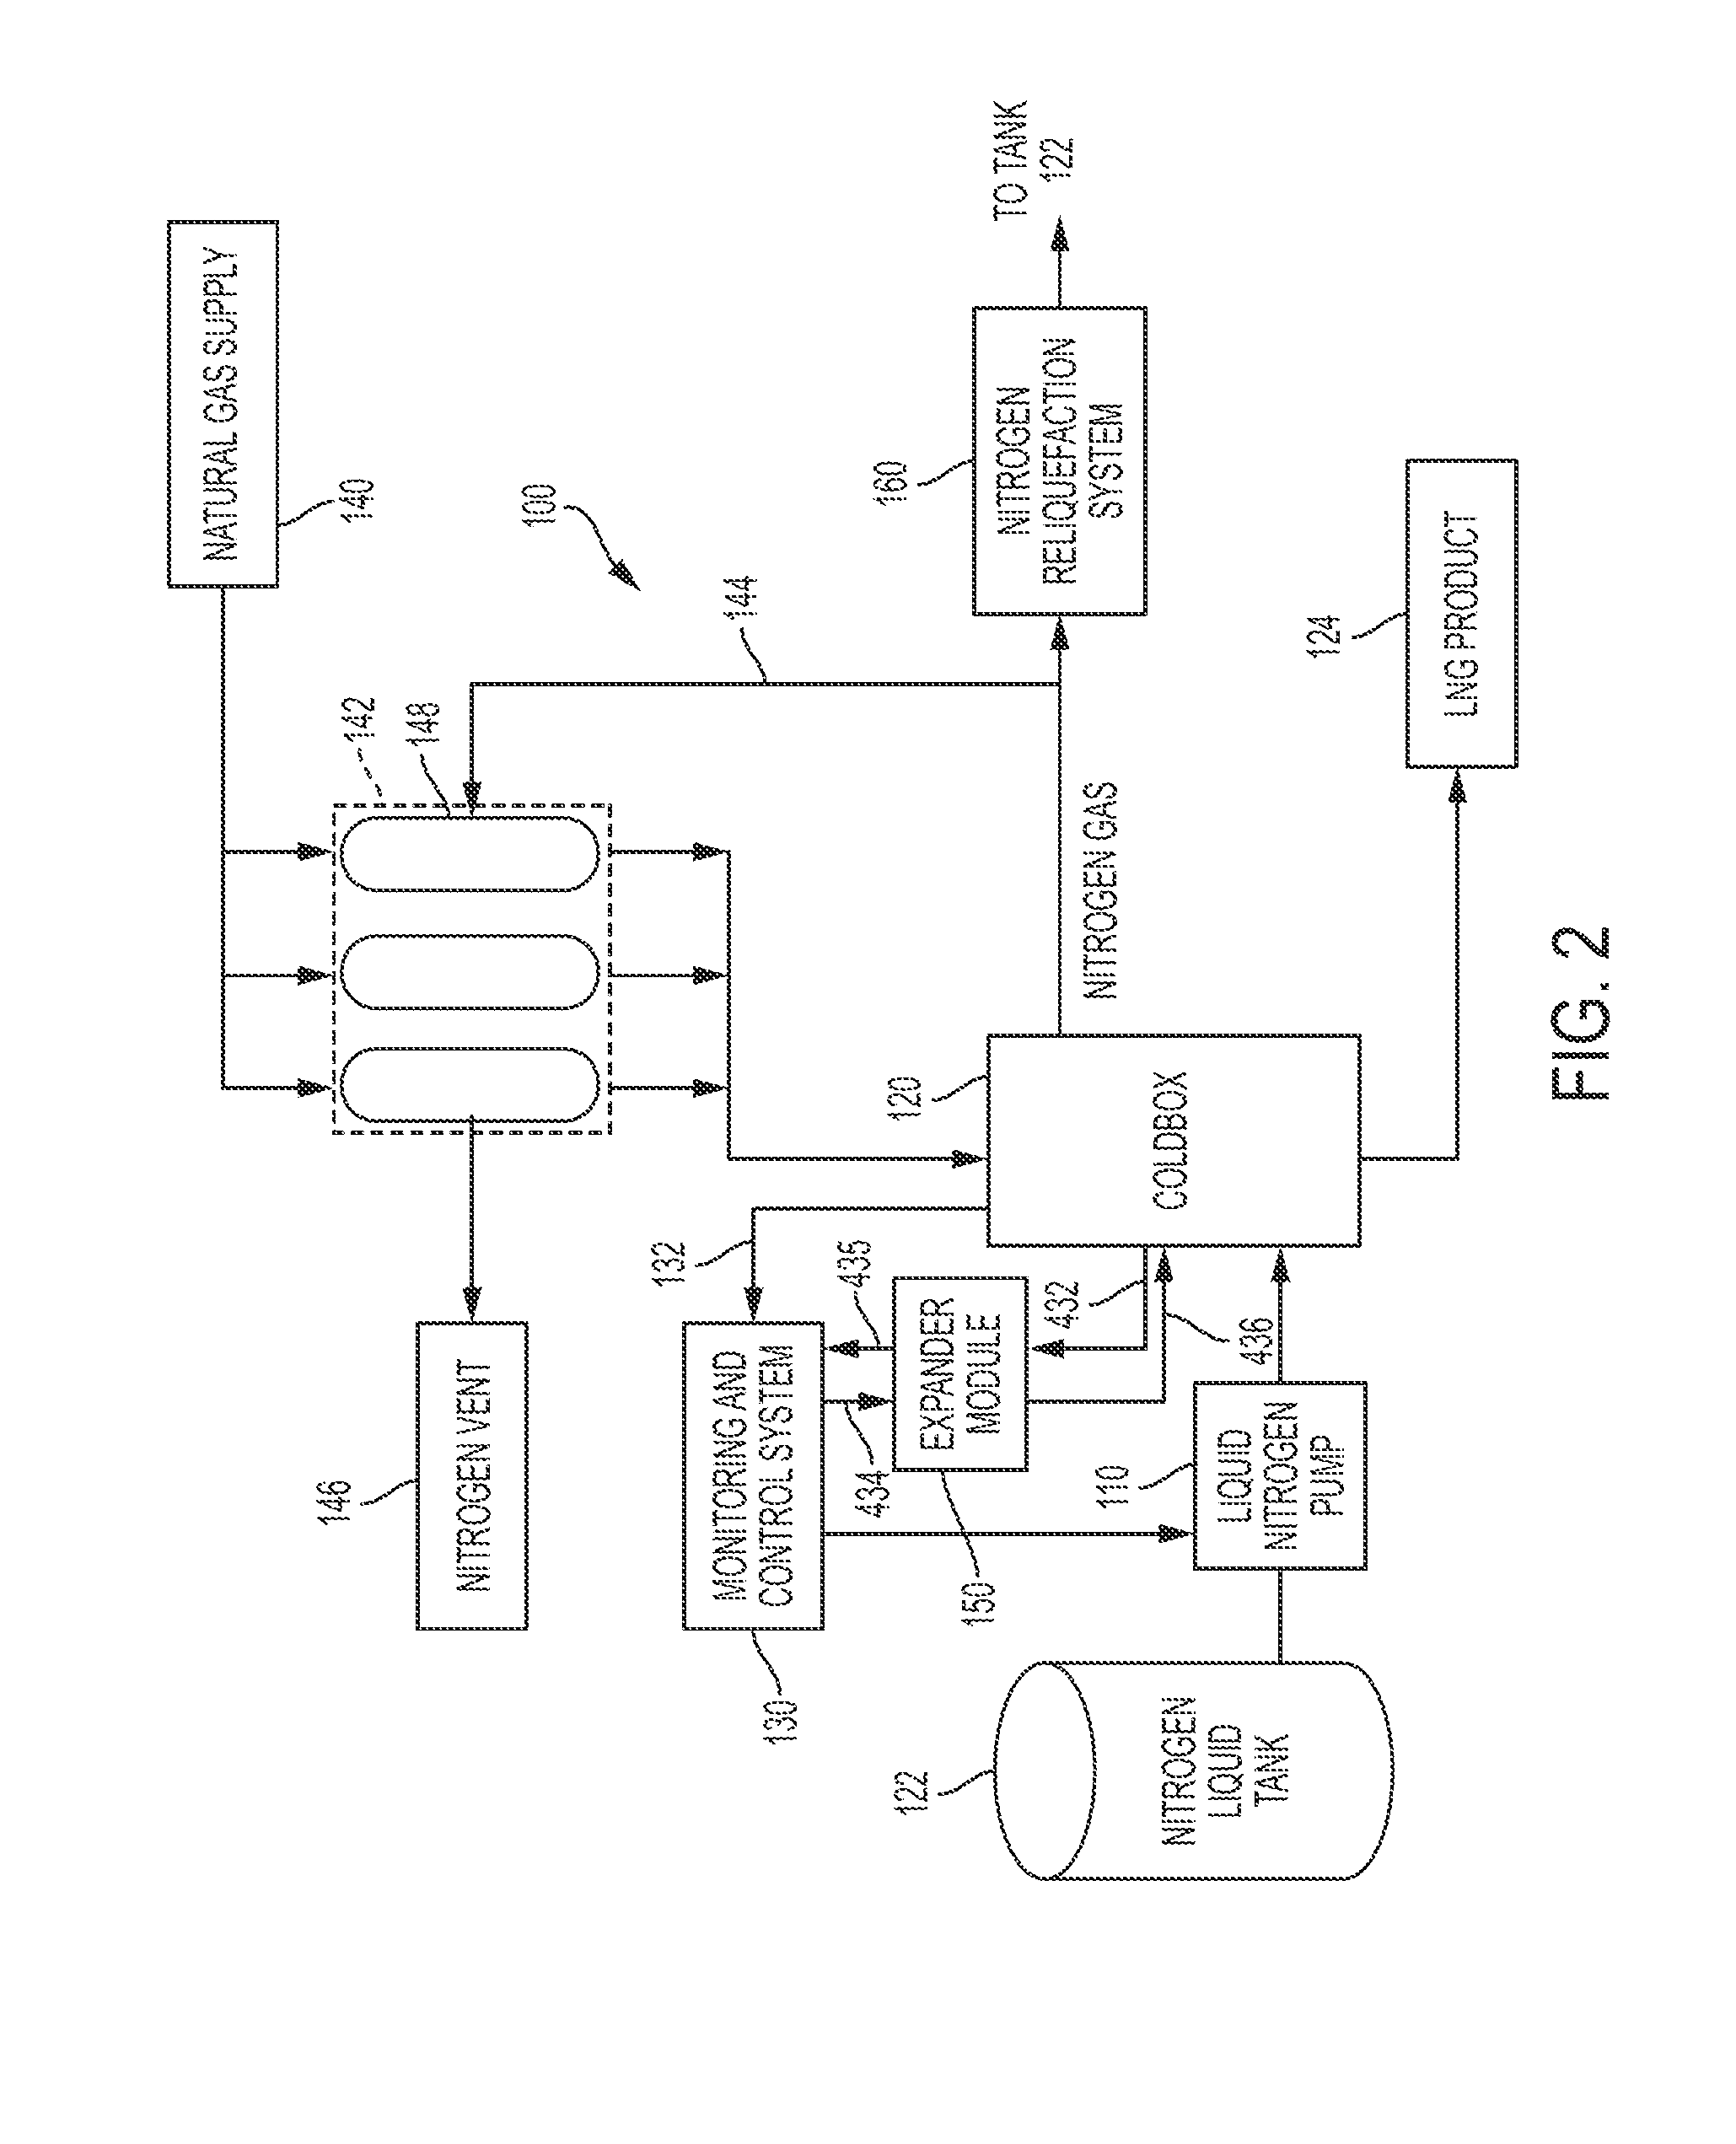 System and method for liquefying natural gas employing turbo expander